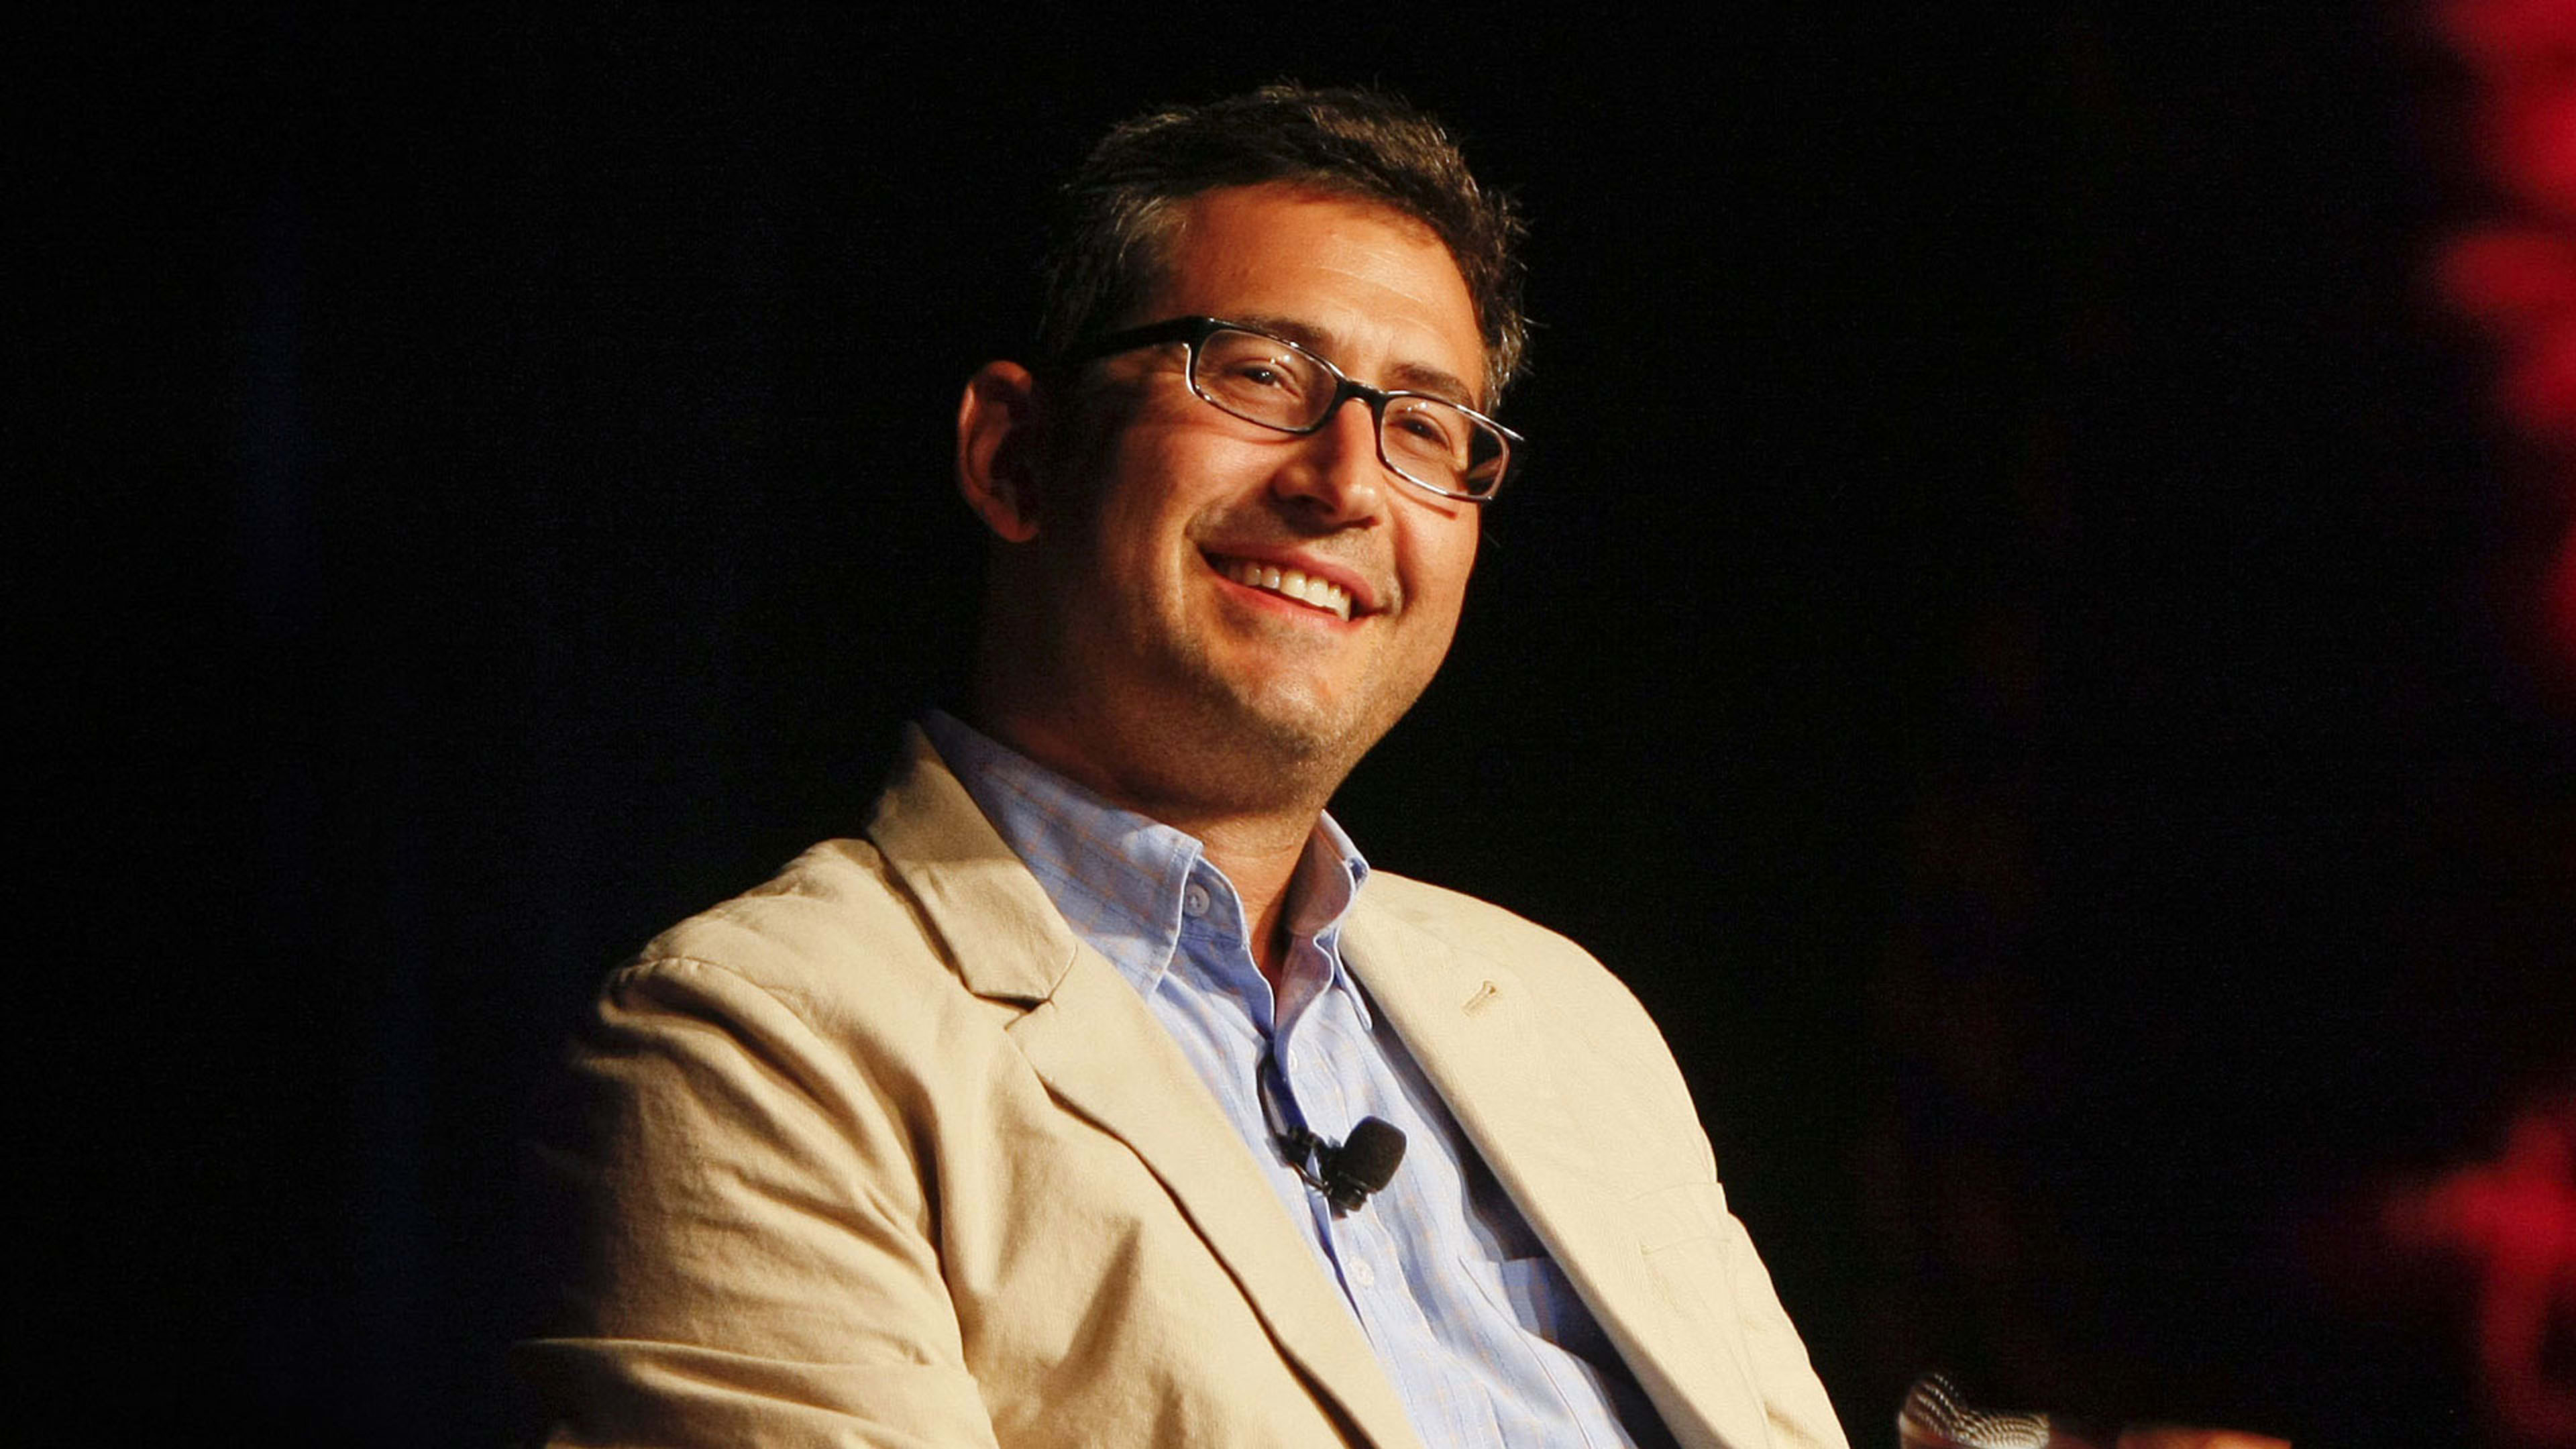 MSNBC has rehired Sam Seder, whom the network fired after a right-wing smear campaign